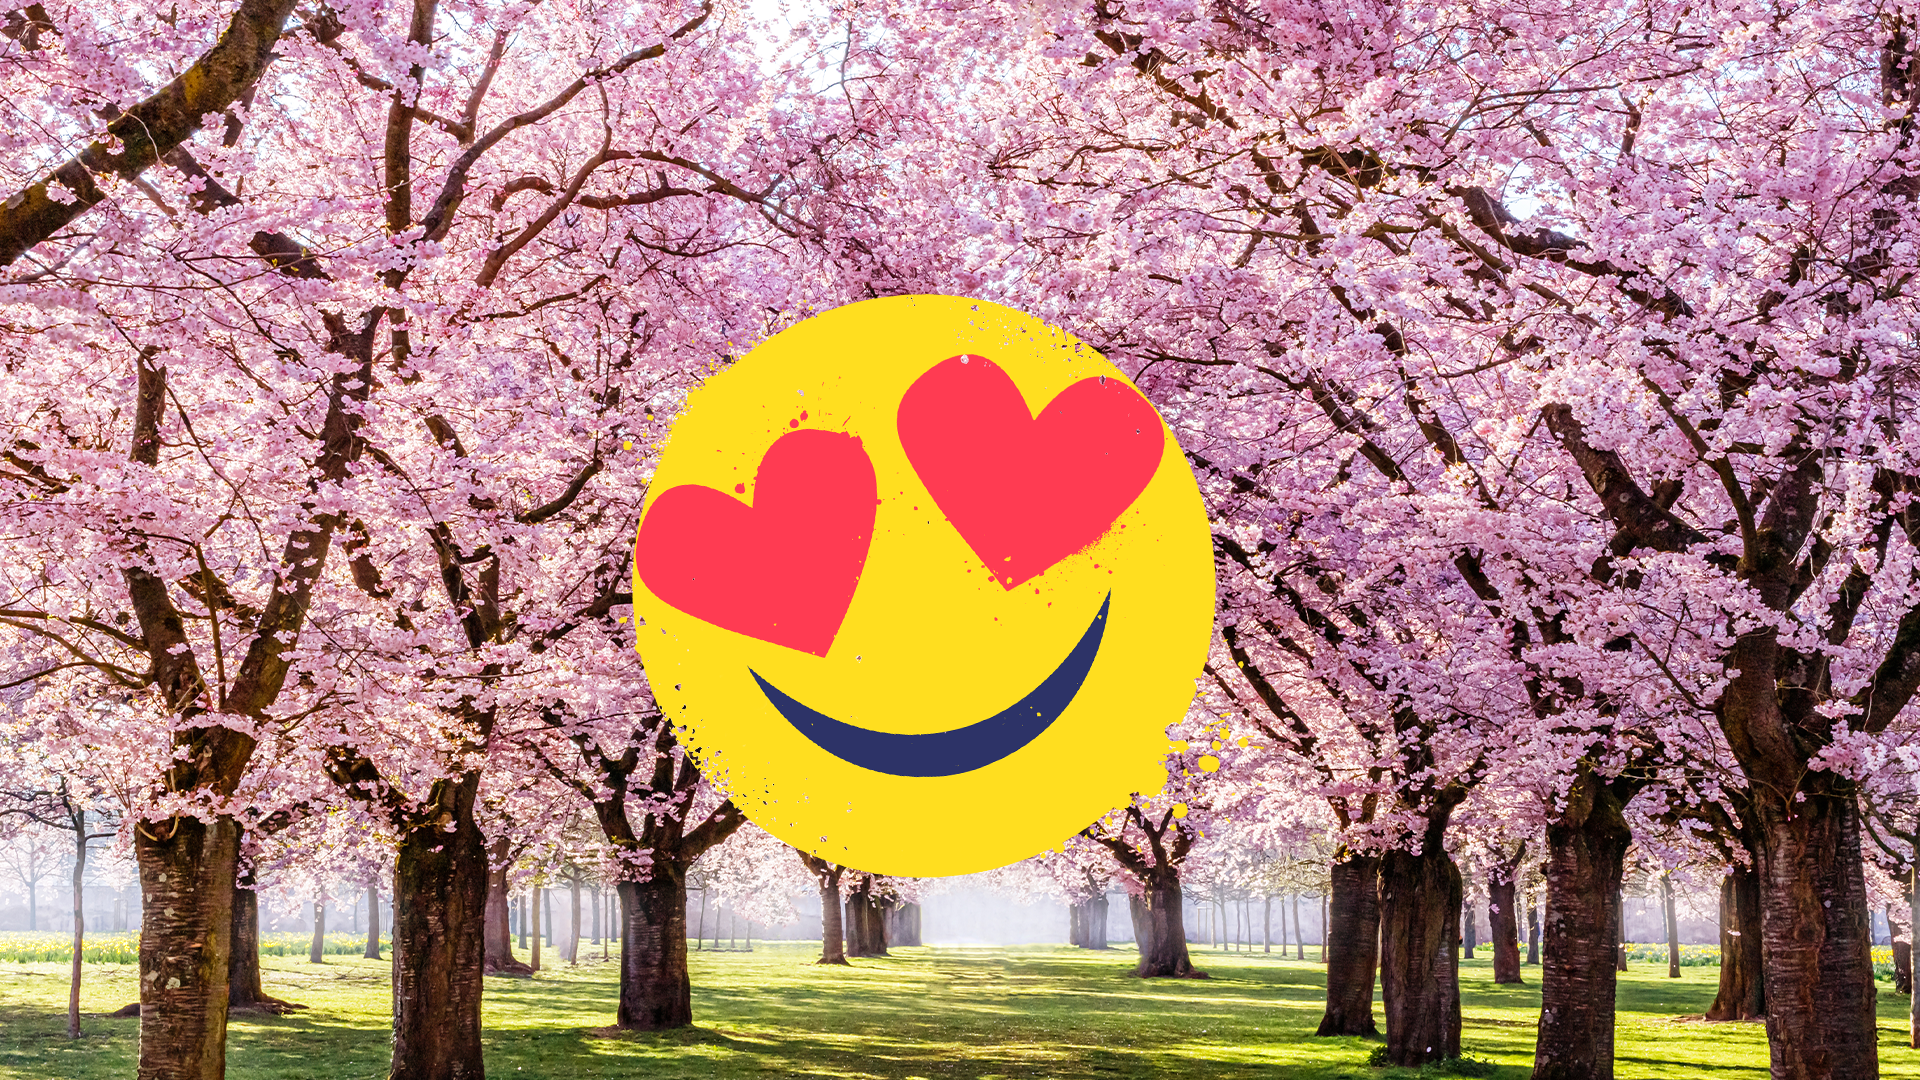 Trees with cherry blossom and heart eyes emoji